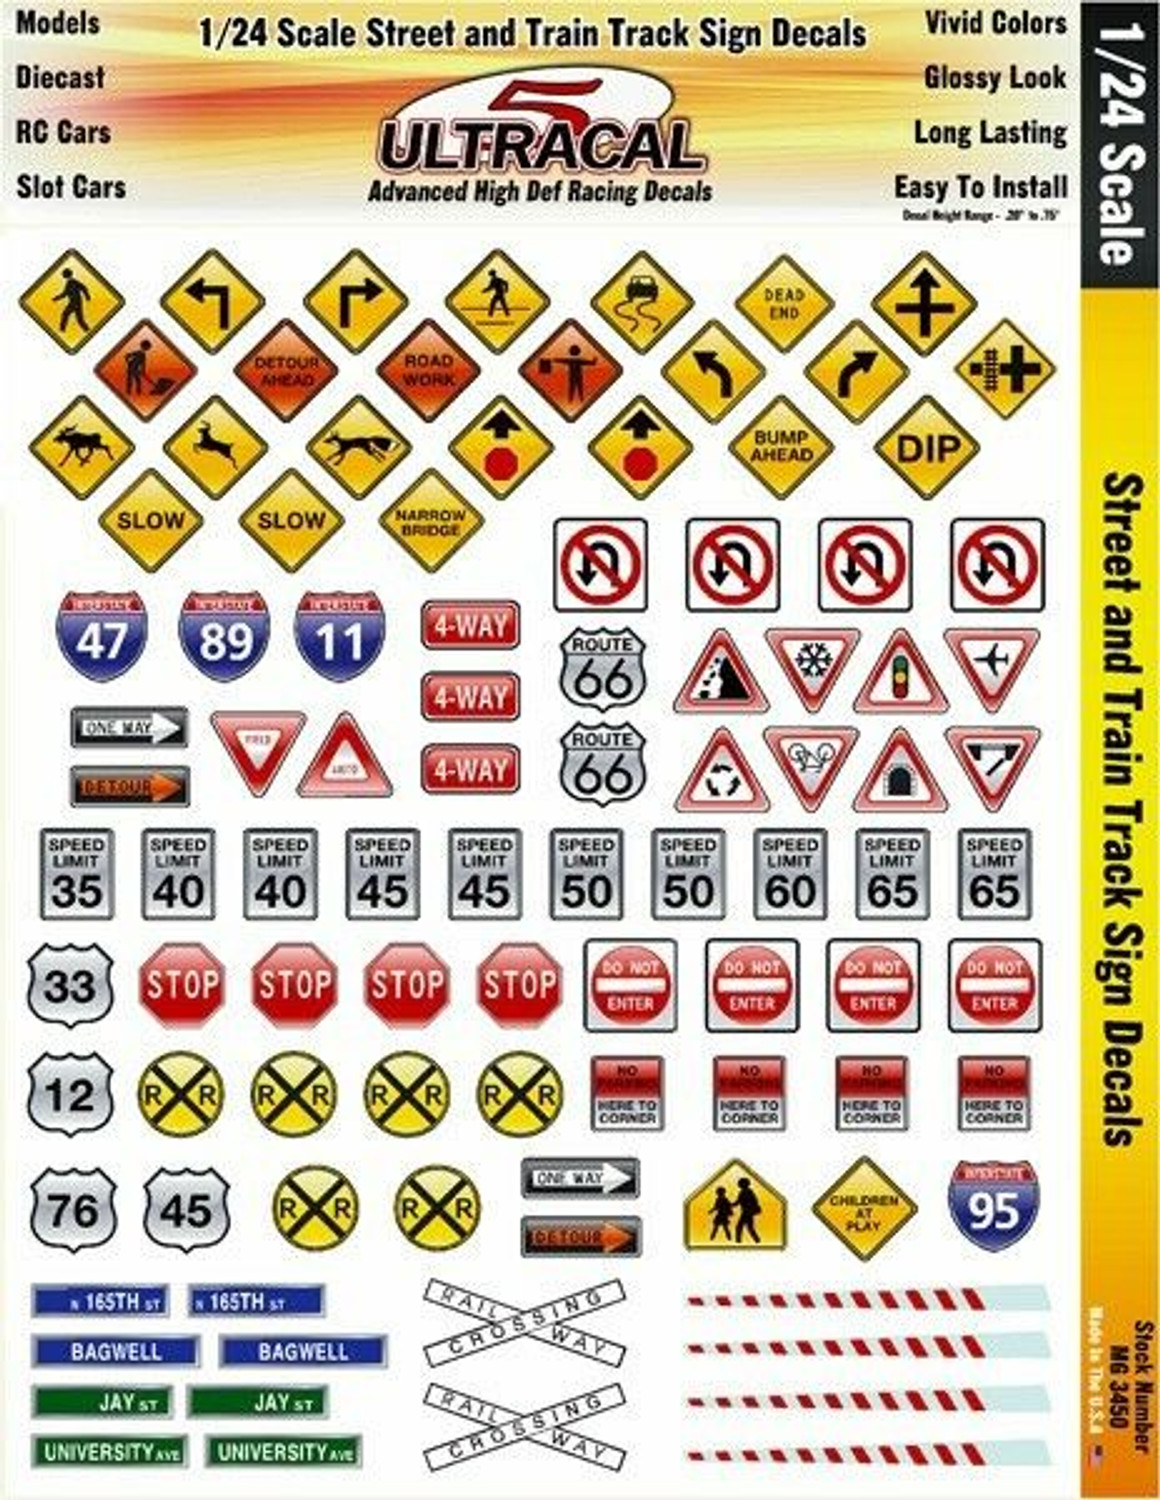 MG 3450 Ultracal Street and Train Track Signs Decals for 1:24 Scale Applications